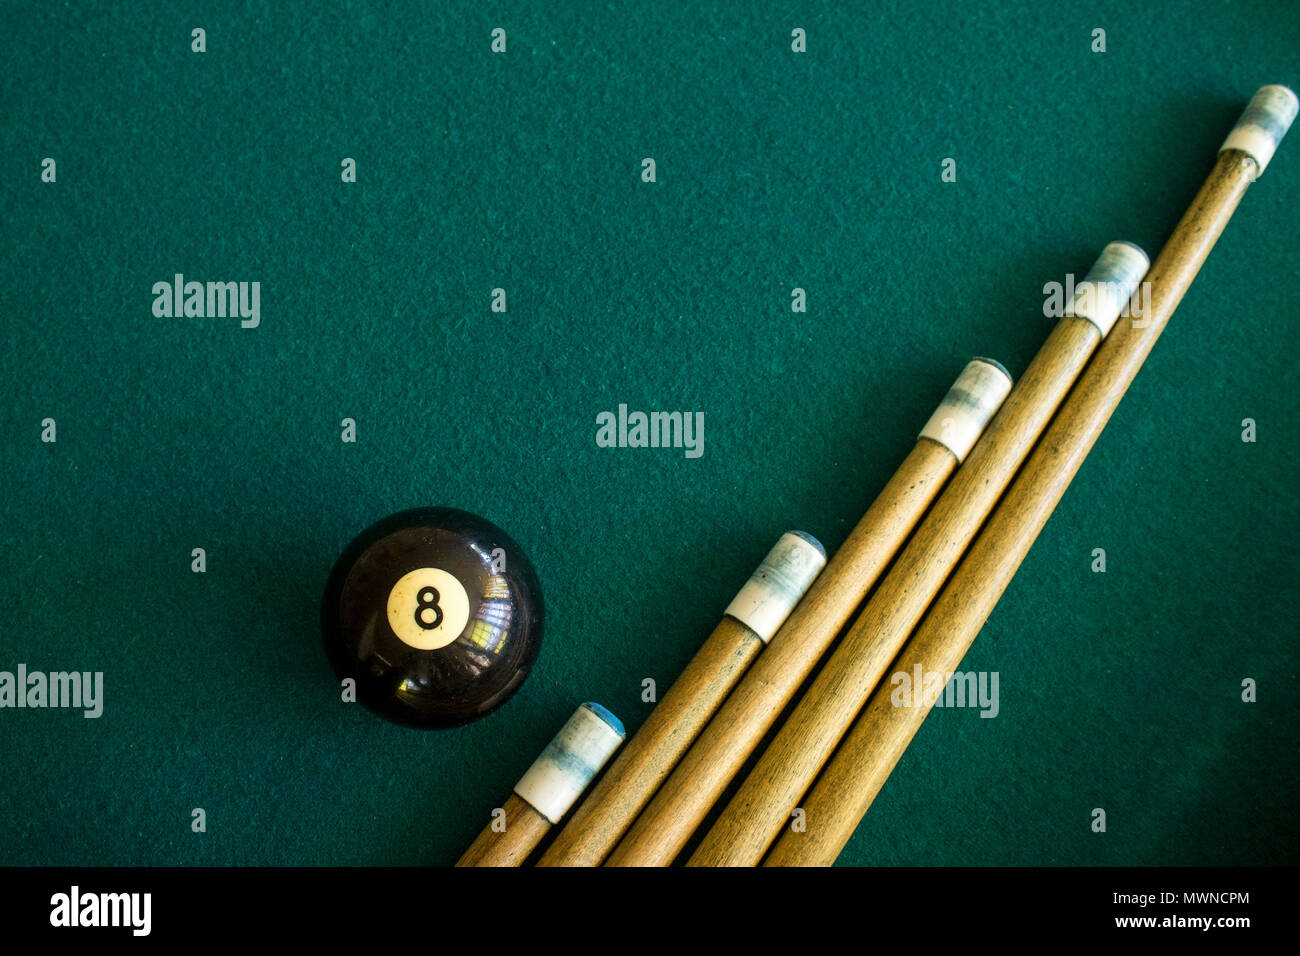 Eight black billiard ball on a green billiard table next to a group of a cue sticks Stock Photo